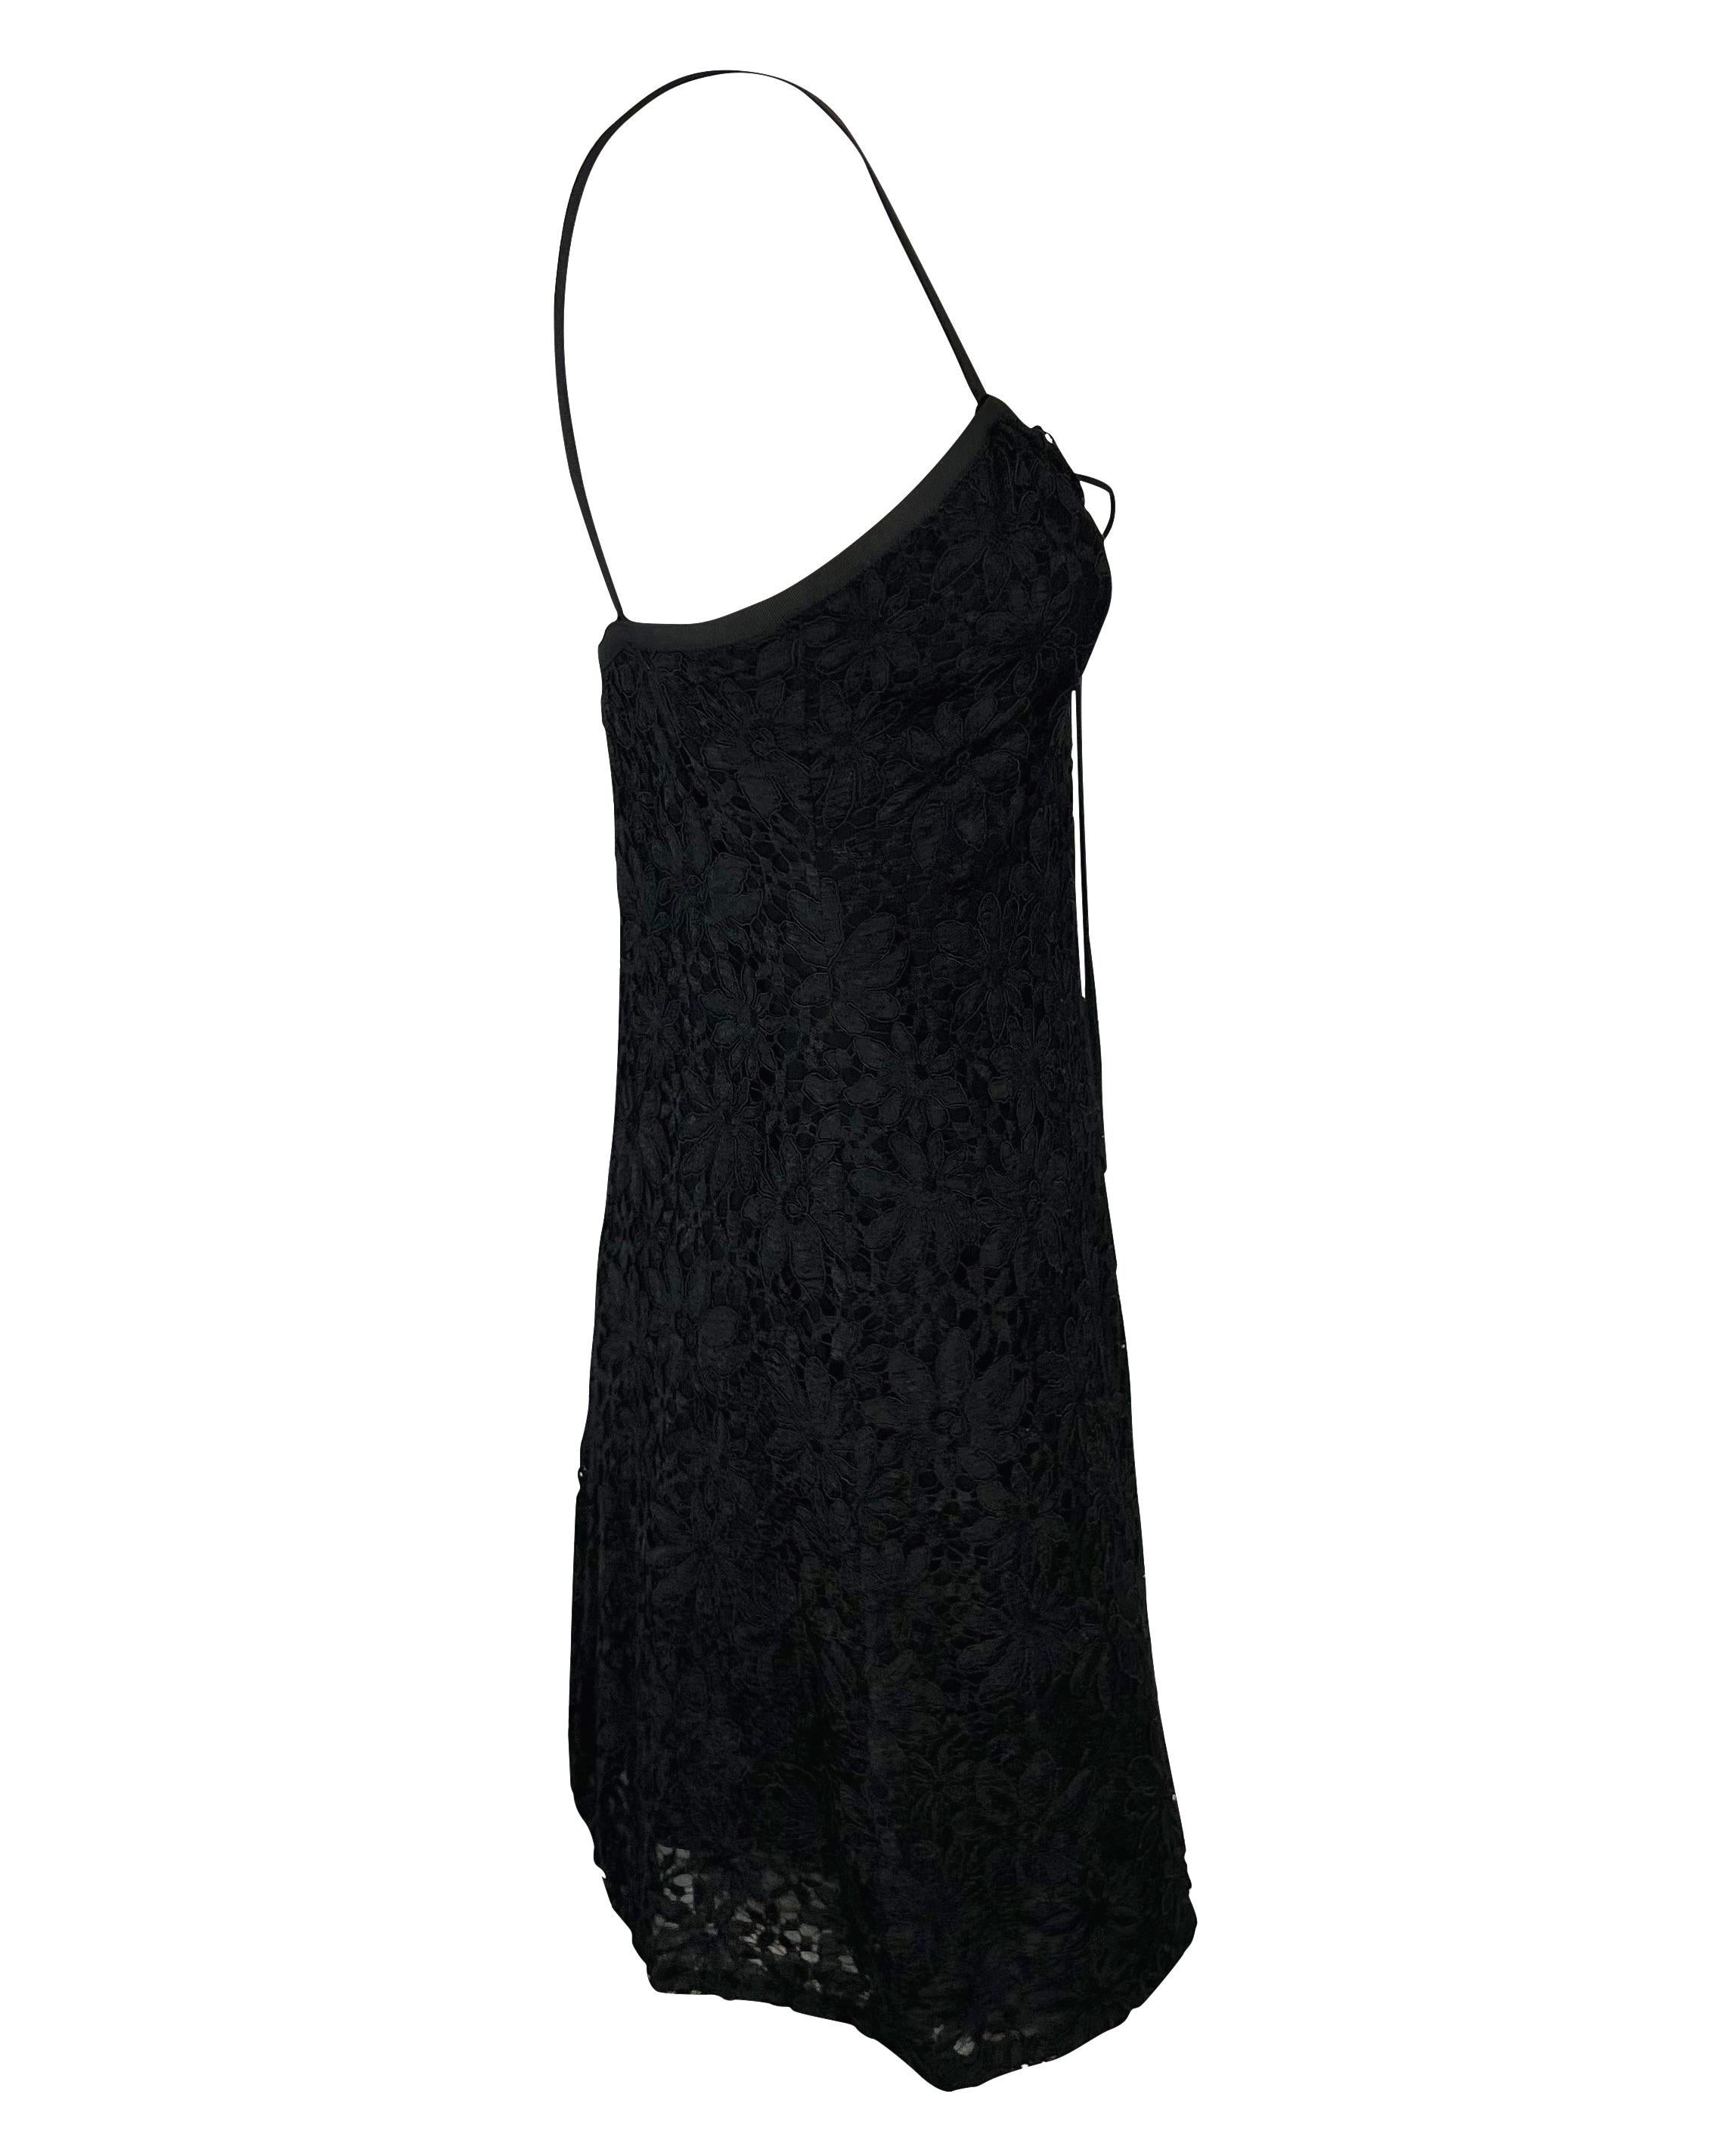 Early 1990s Yves Saint Laurent Rive Gauche Lace-Up Black Sheer Lace Mini Dress For Sale 1